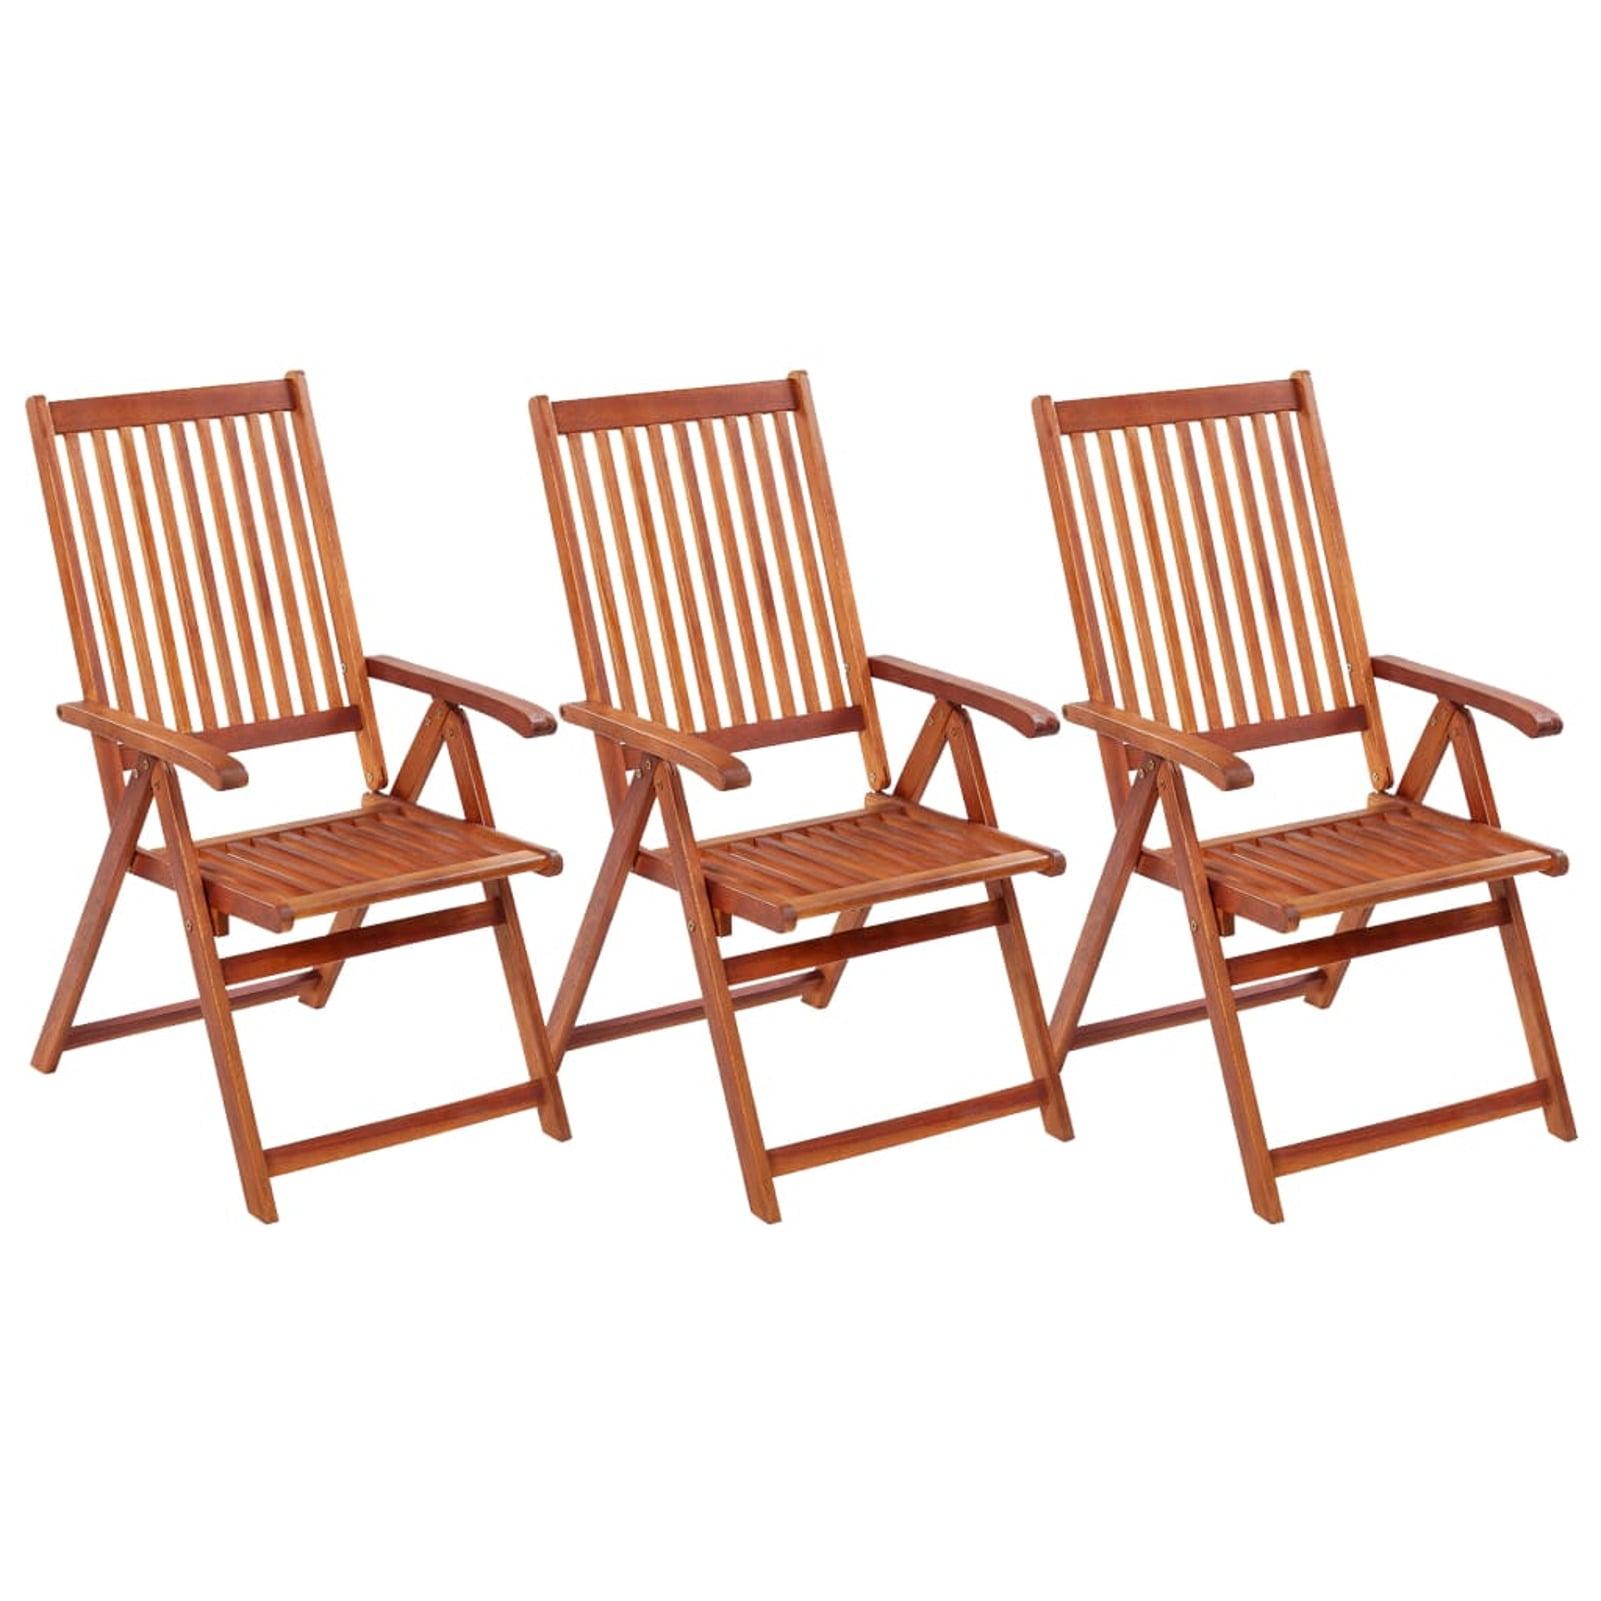 Tropical Acacia Wood Adjustable Folding Patio Chair in Brown